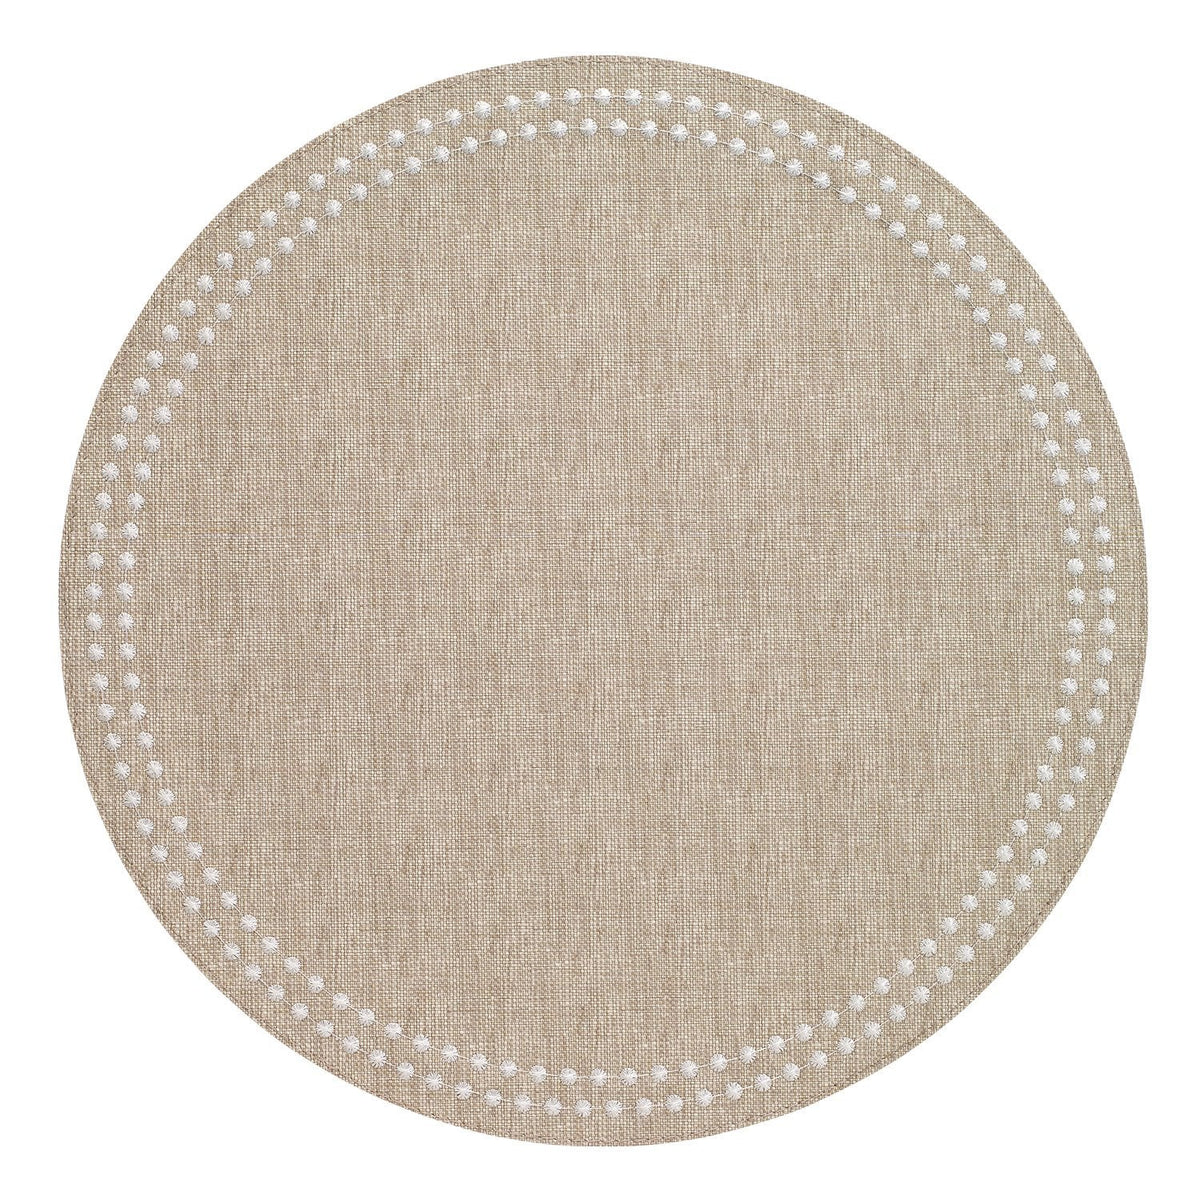 Pearls Placemat, Set of 4